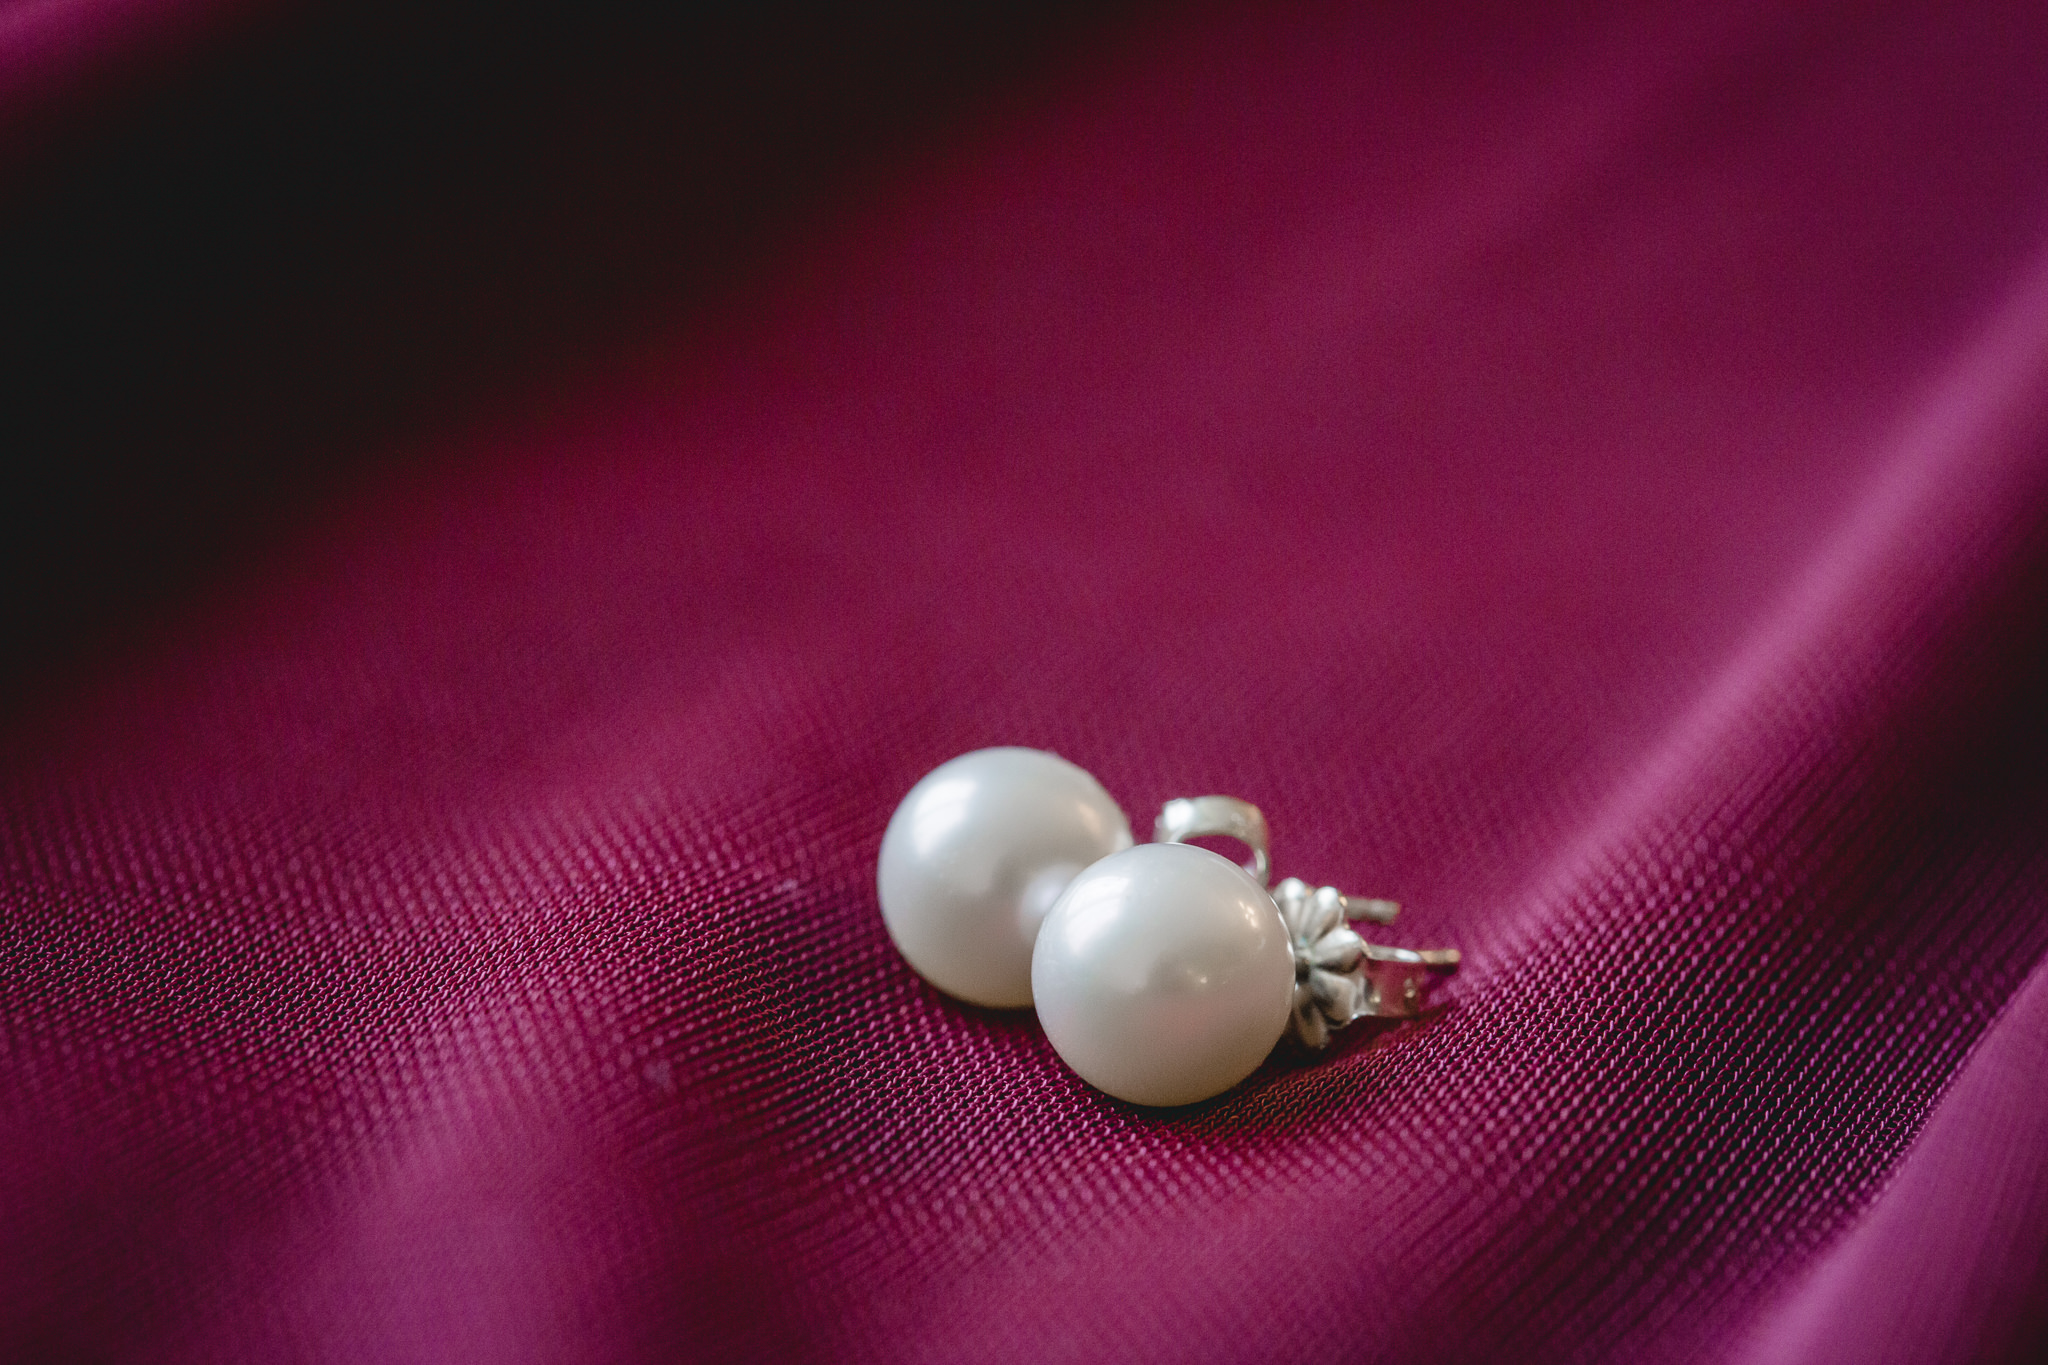 Bride's white pearl earrings on a wine colored bridesmaids dress